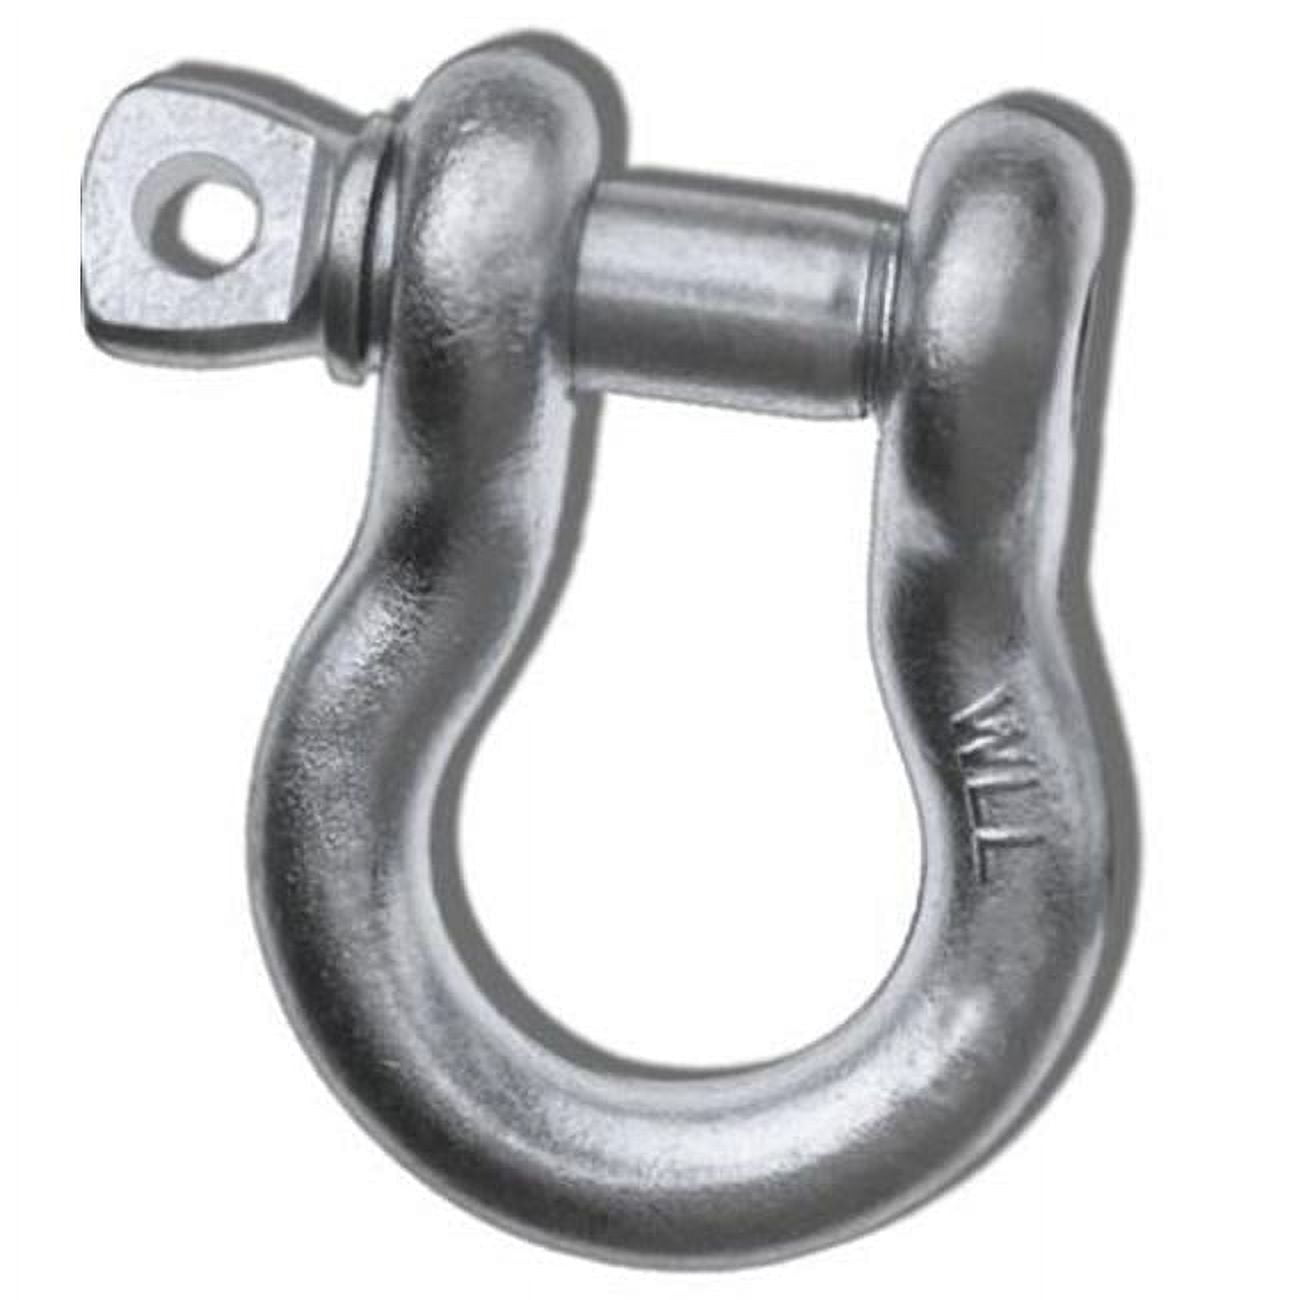 Picture of 1 inch MEGA D-SHACKLE - GALVANIZED (SINGLE) (4X4 VEHICLE RECOVERY)